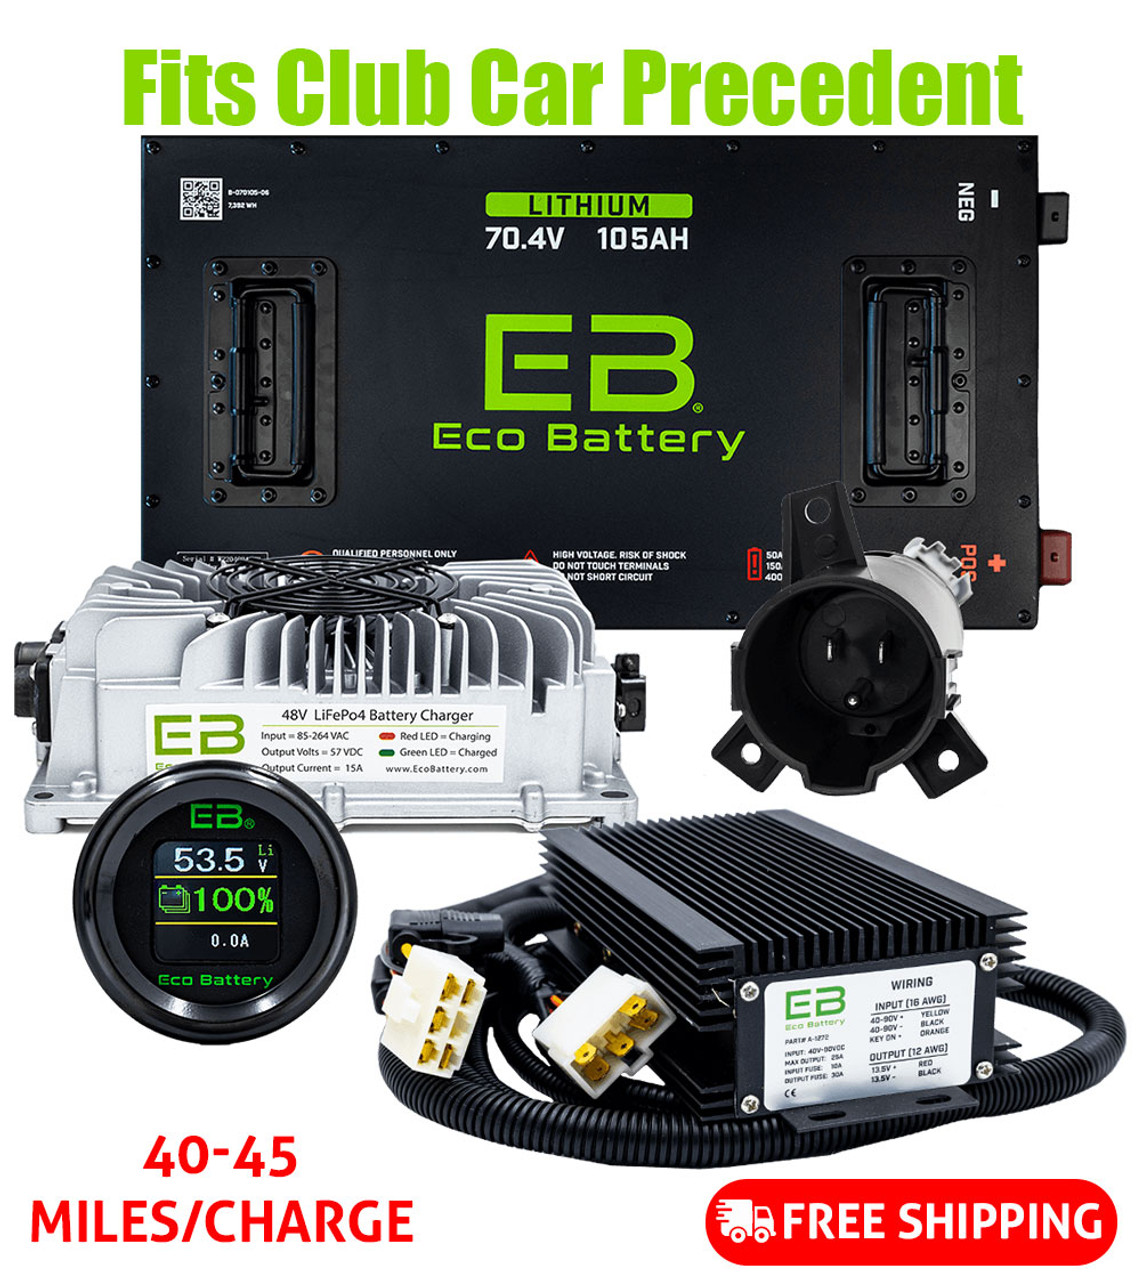 Eco Battery 70V 105Ah LifePo4 Club Car Precedent Golf Cart Lithium Battery Bundle Kit with Charger & 12V Converter (2009-Up), B-3144